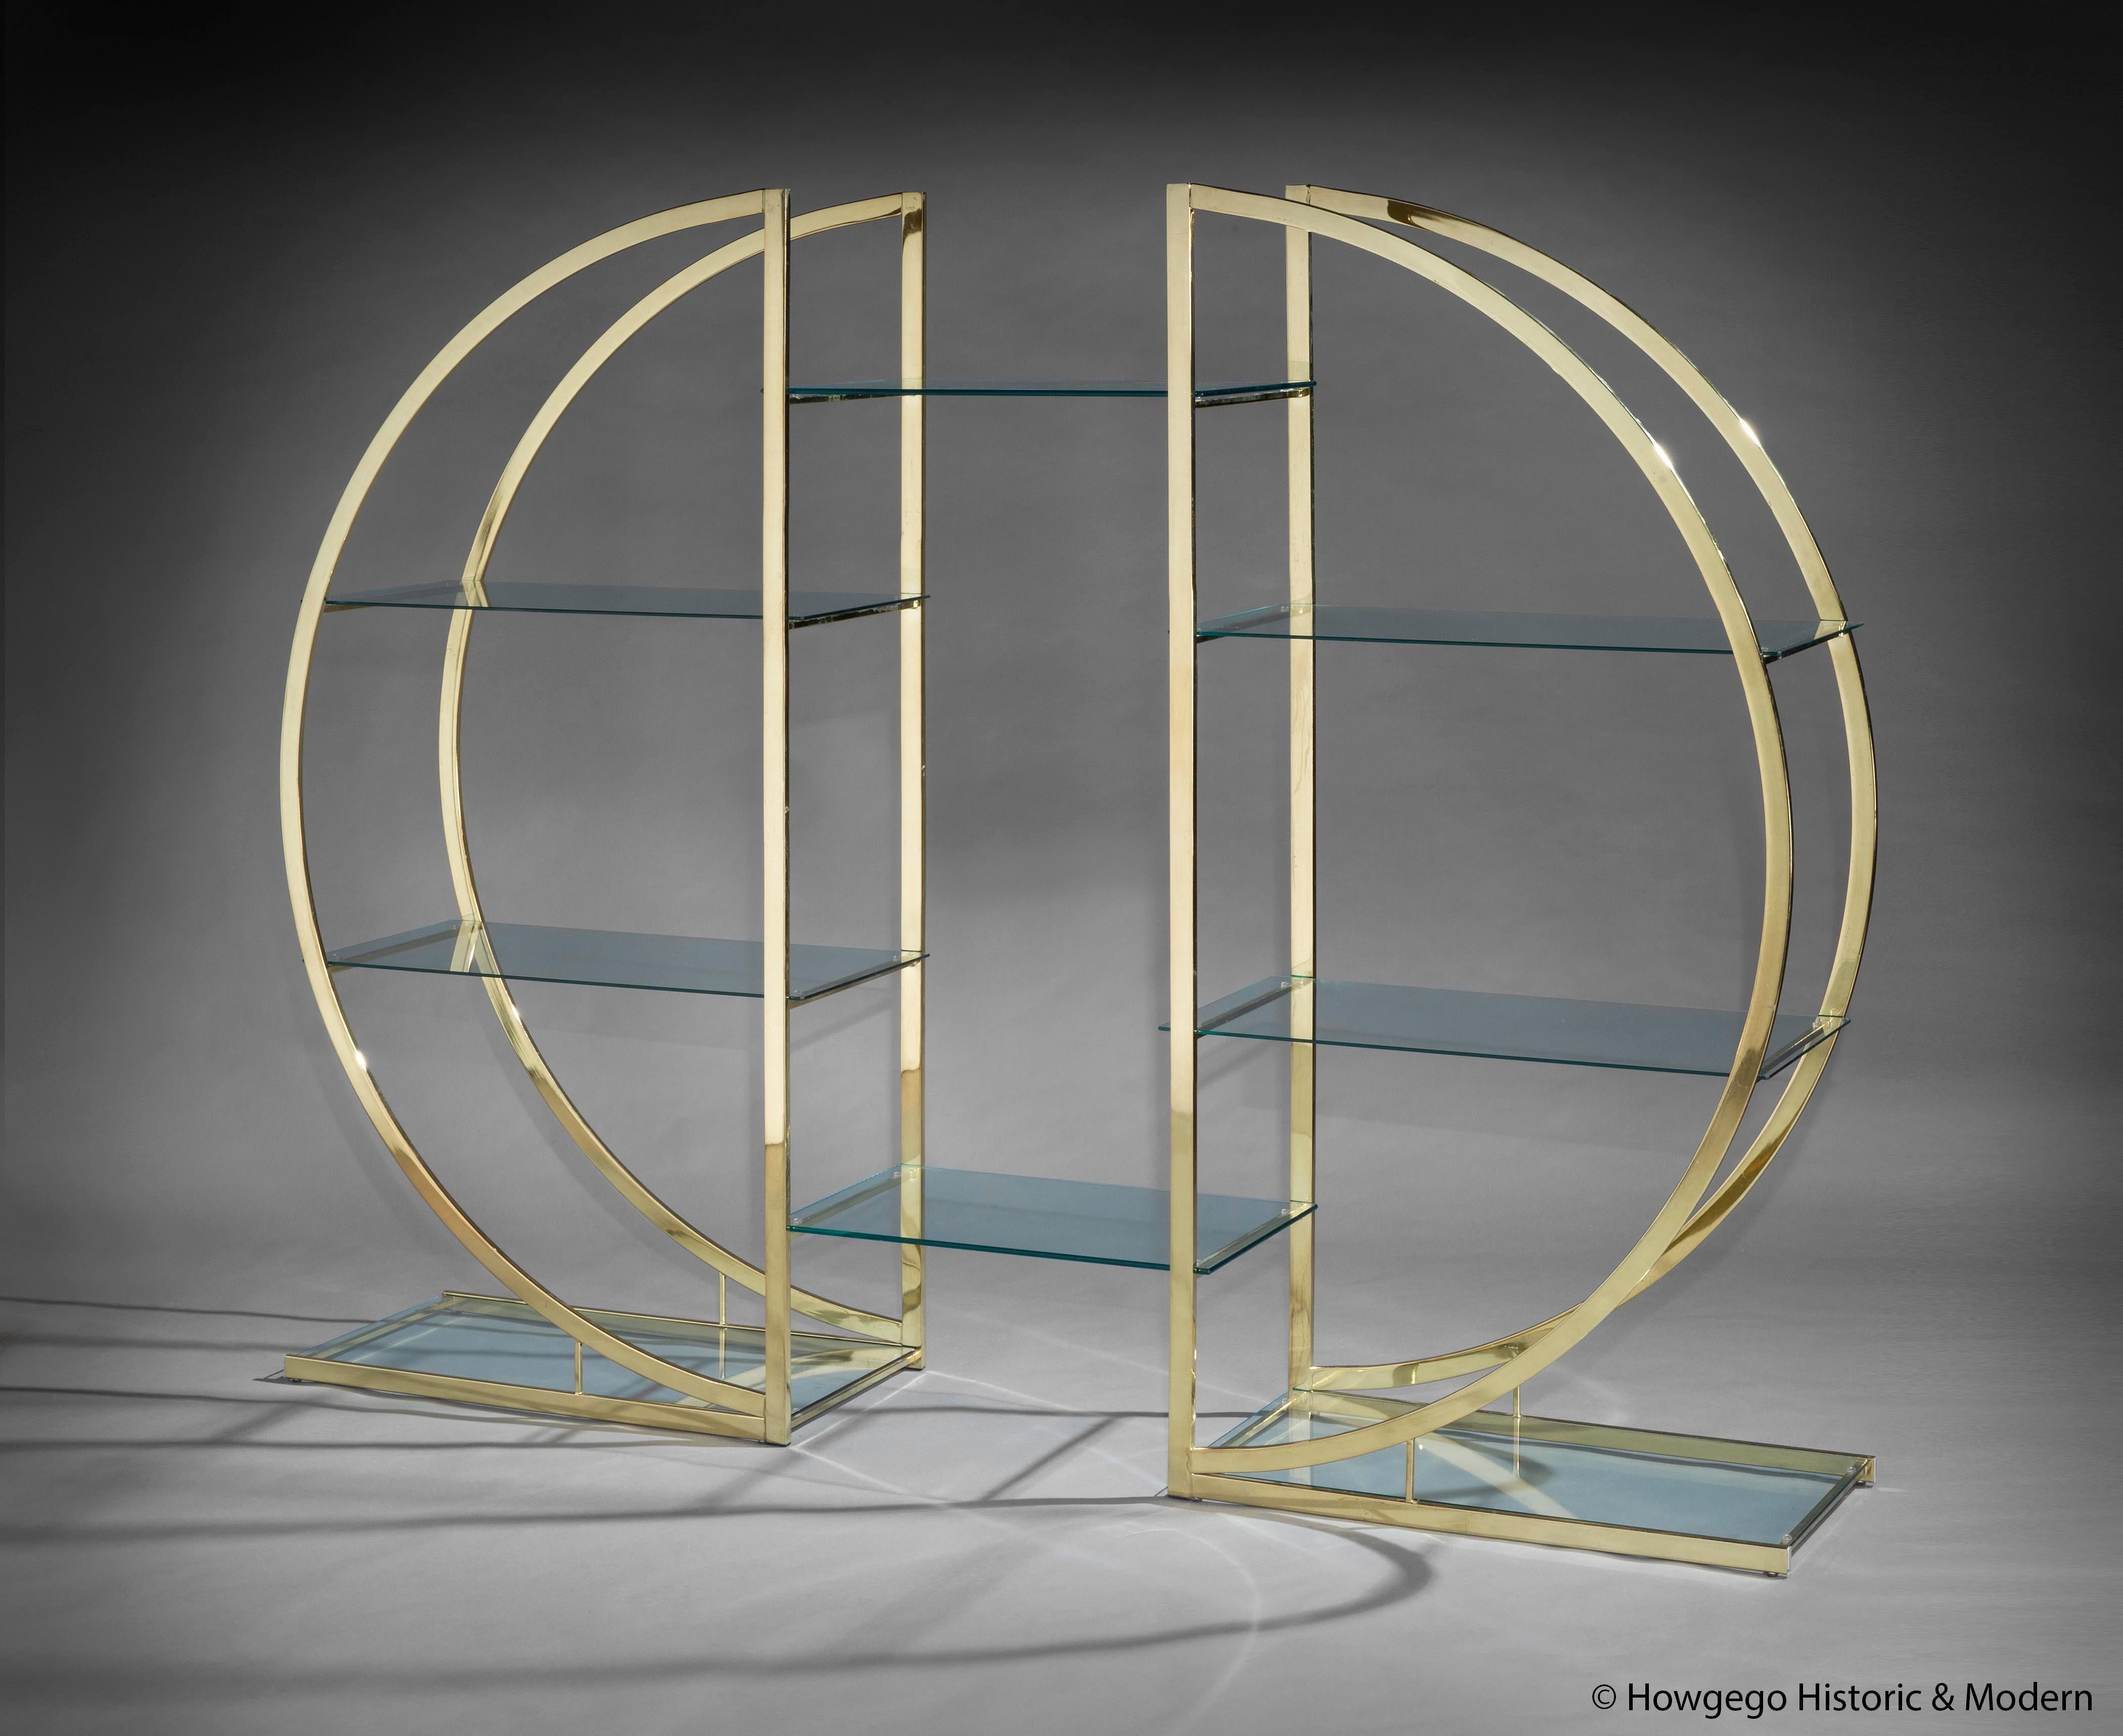 Classical elegance, Mid-Century Modern brass & glass bookcase or display piece evoking Art Deco designs
Versatile can be used as one large bookcase or two small bookcases

If used as a single piece the top and bottom shelves bridges both